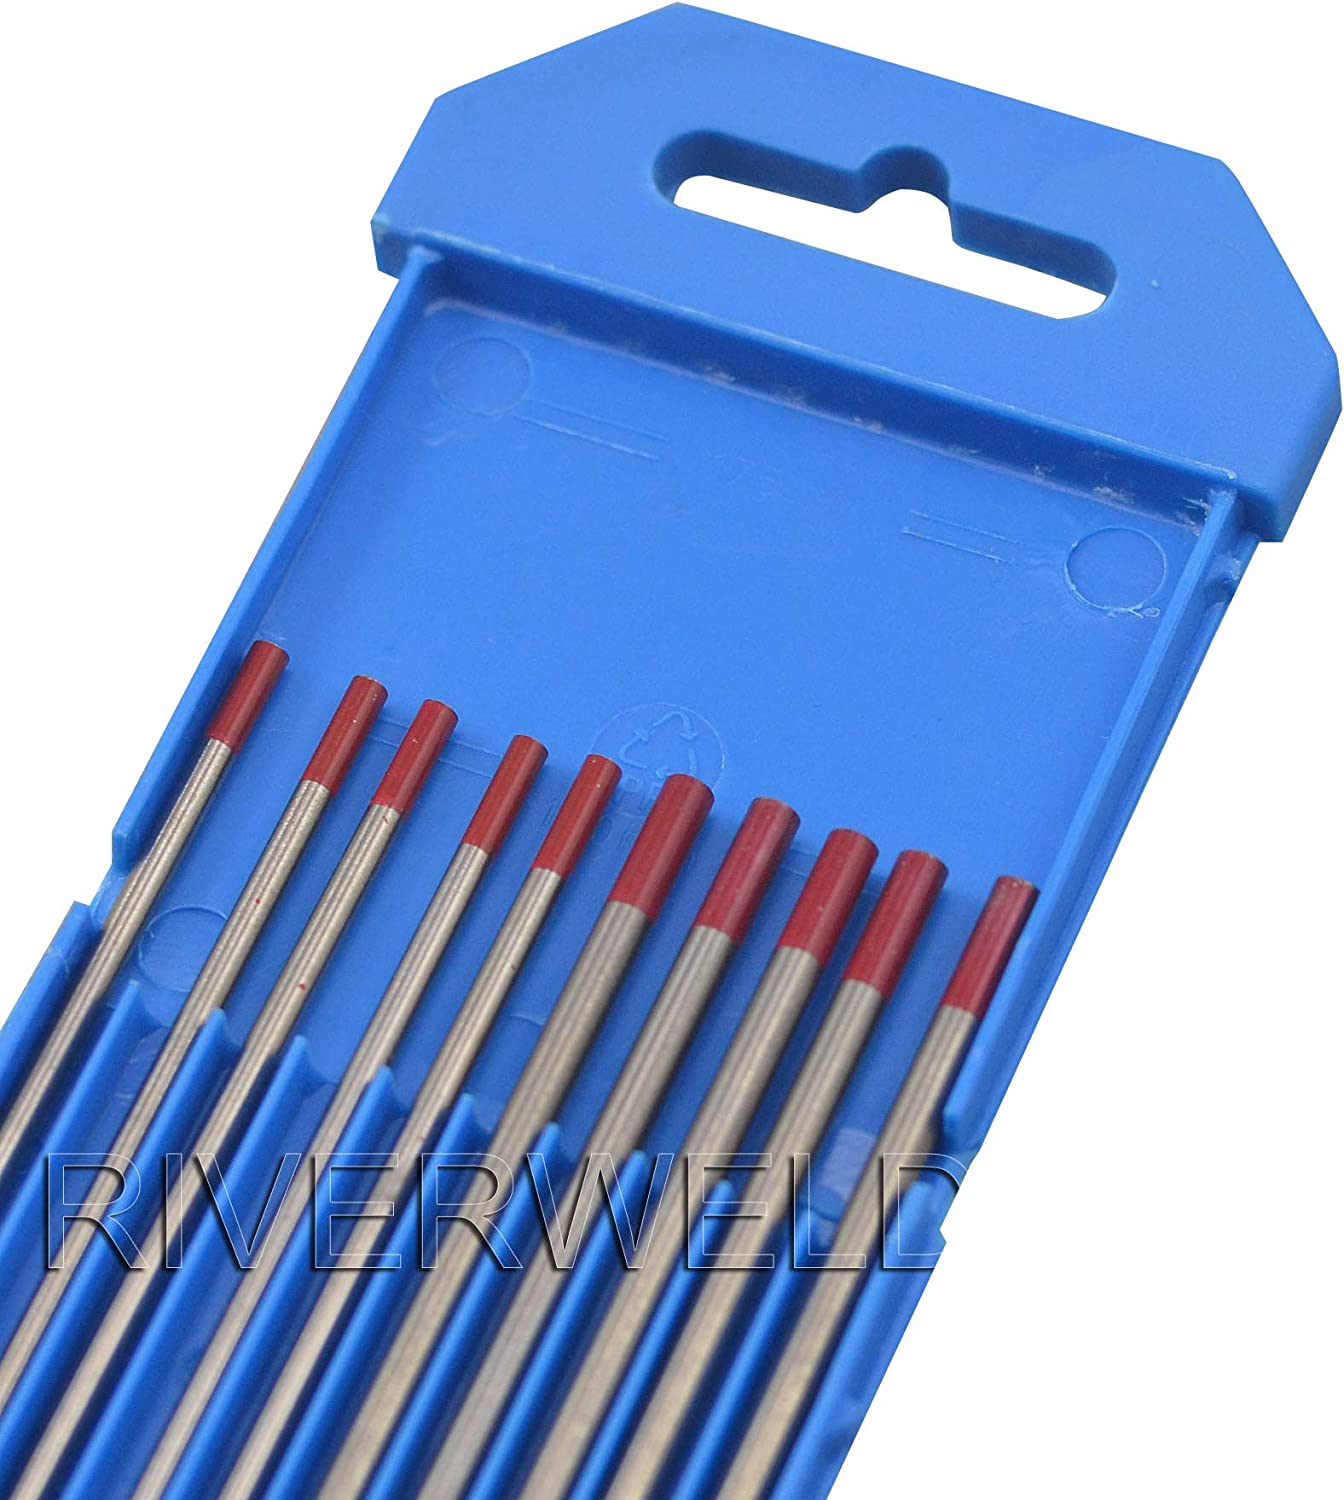 2 Percent Thoriated WT20 Red TIG Tungsten Electrode Assorted Size 2.4mm x 150mm & 3.2mm x 150mm